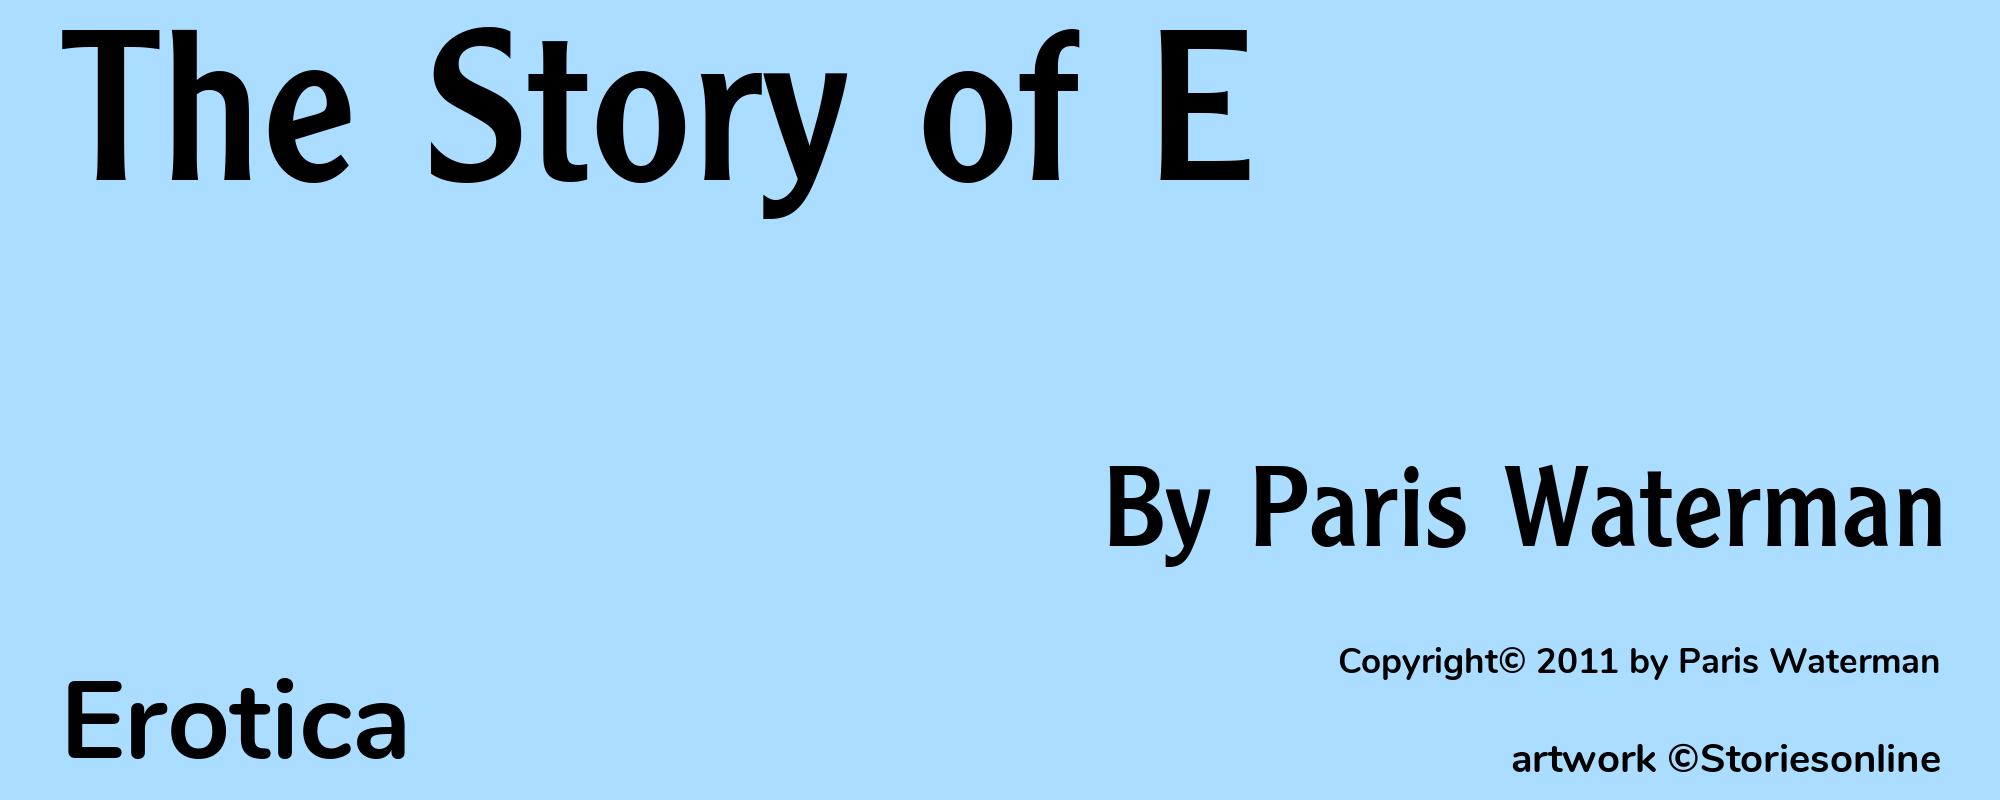 The Story of E - Cover